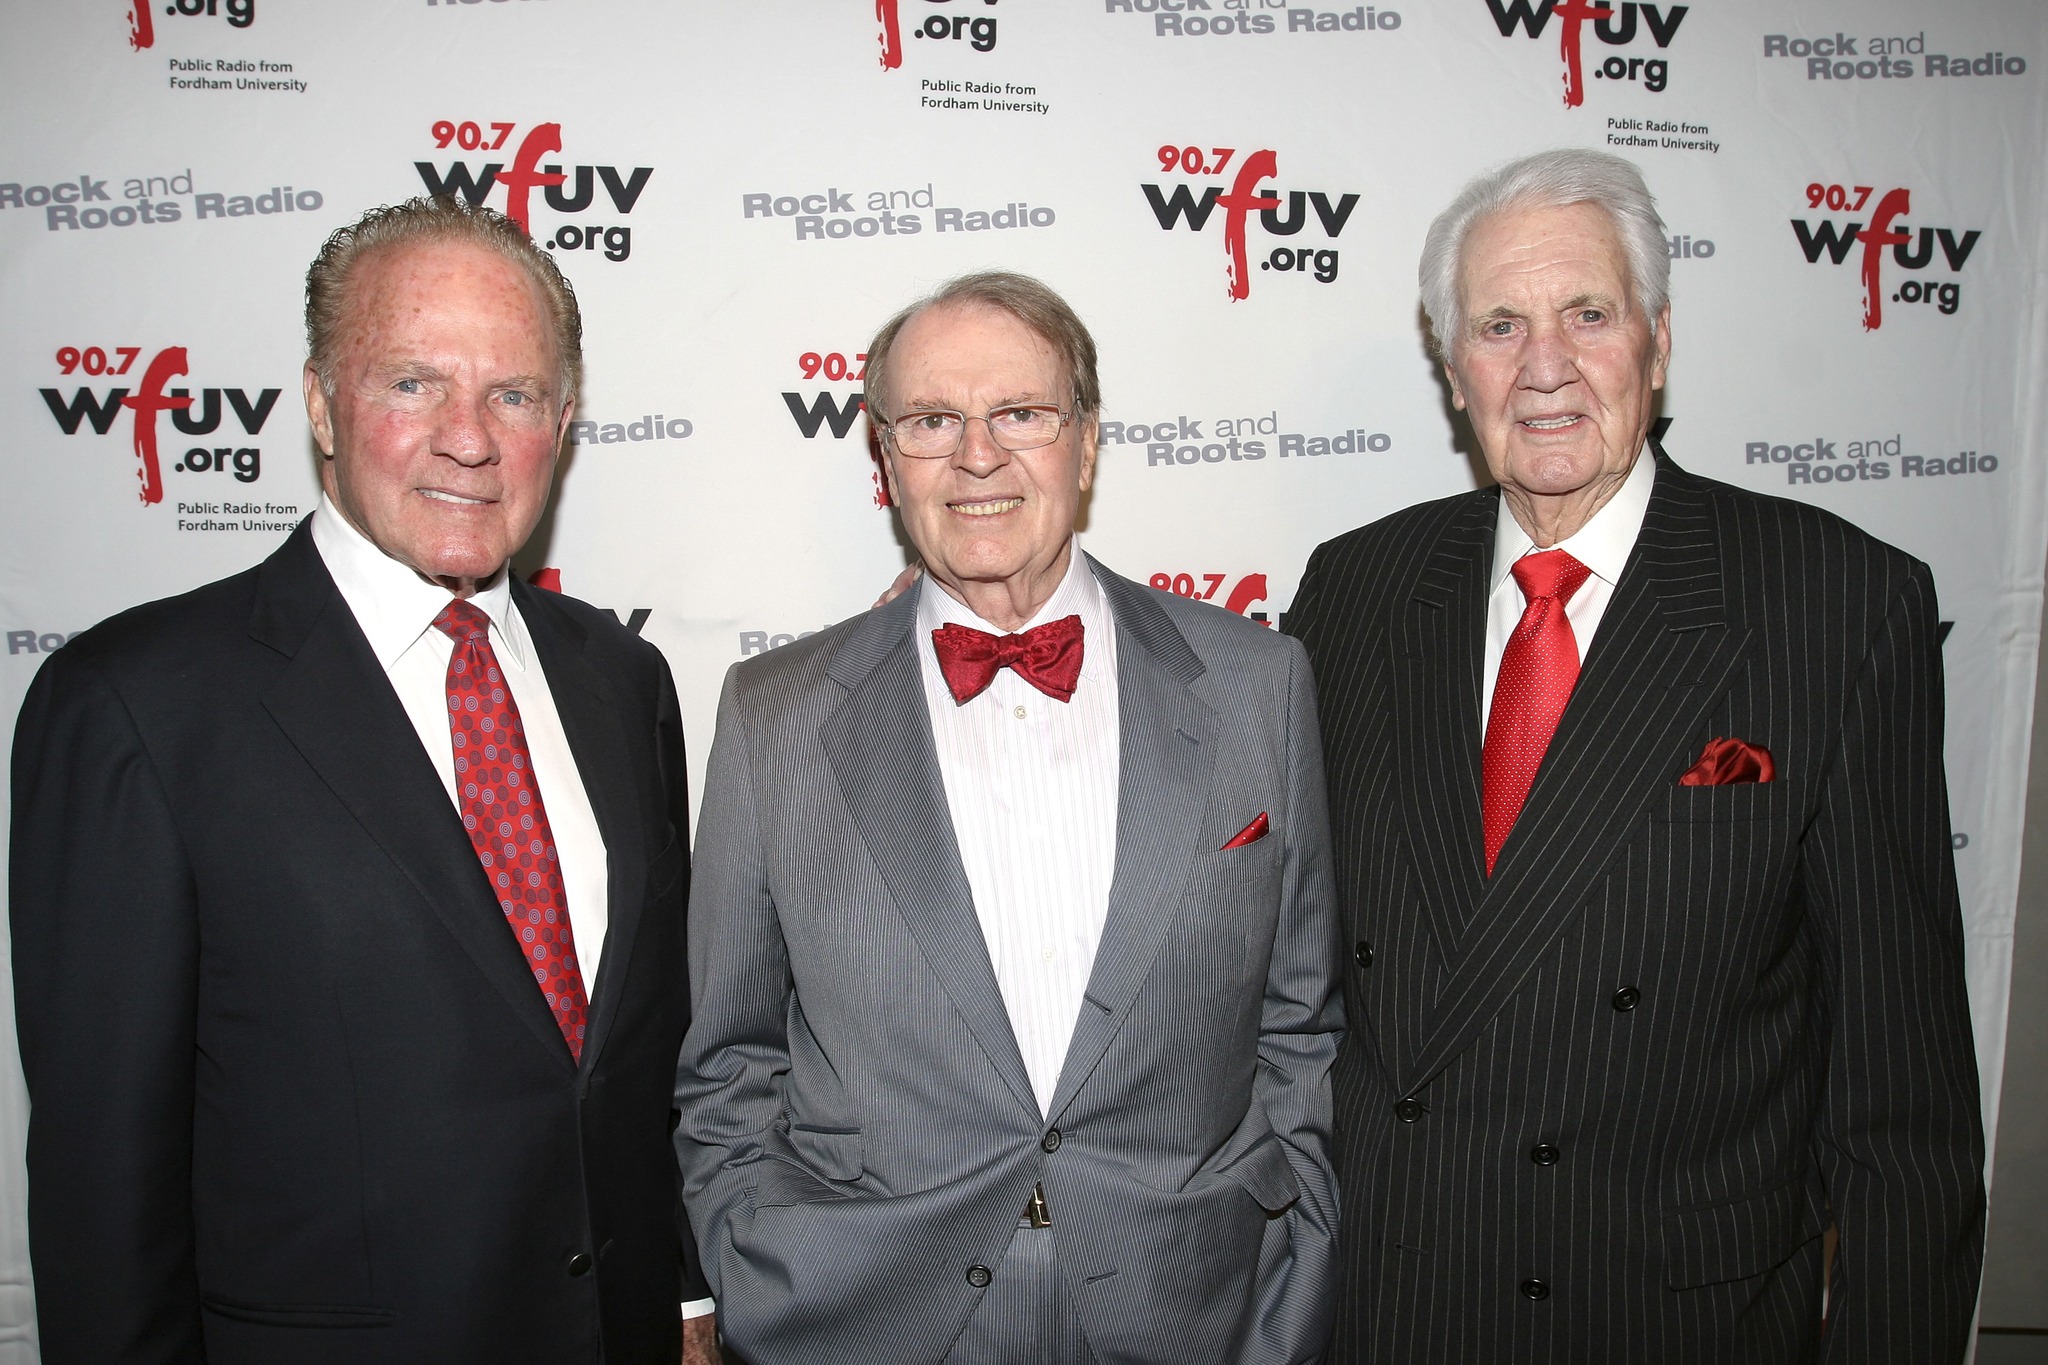 Frank Gifford, Charles Osgood and Pat Summerall